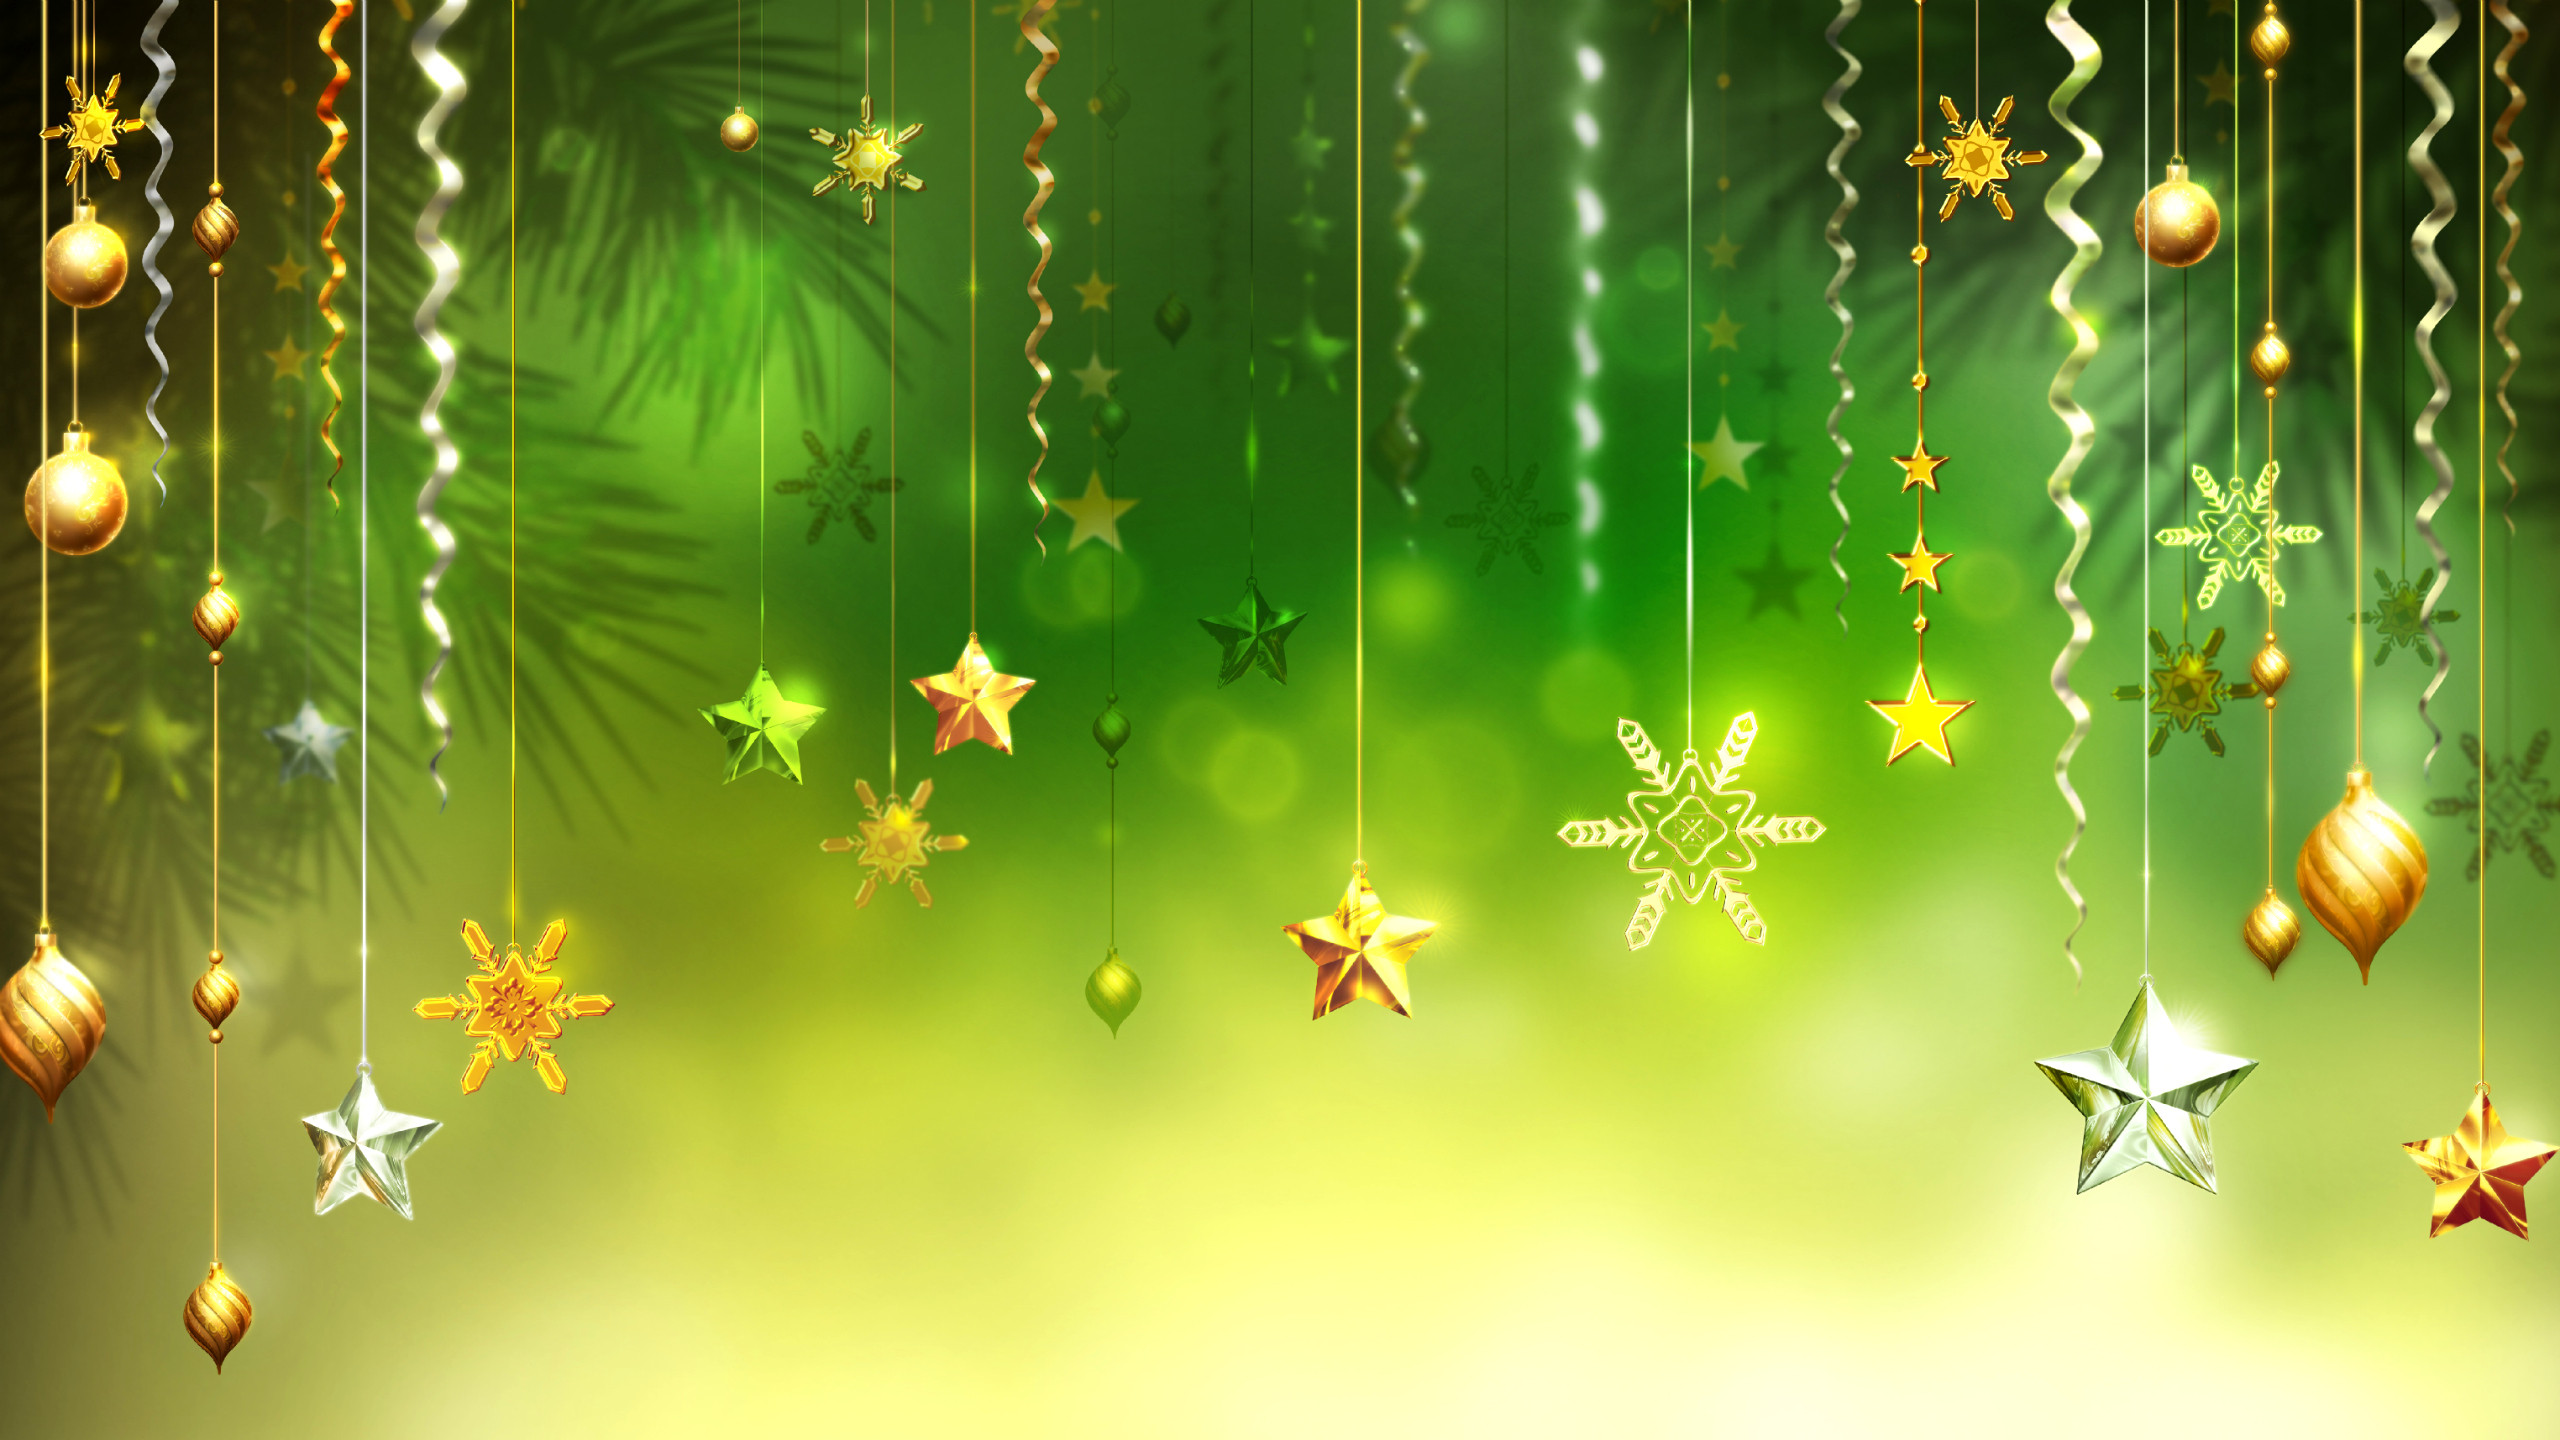 Free Christmas Background Images, Download Free Christmas Background Images png images, Free ClipArts on Clipart Library